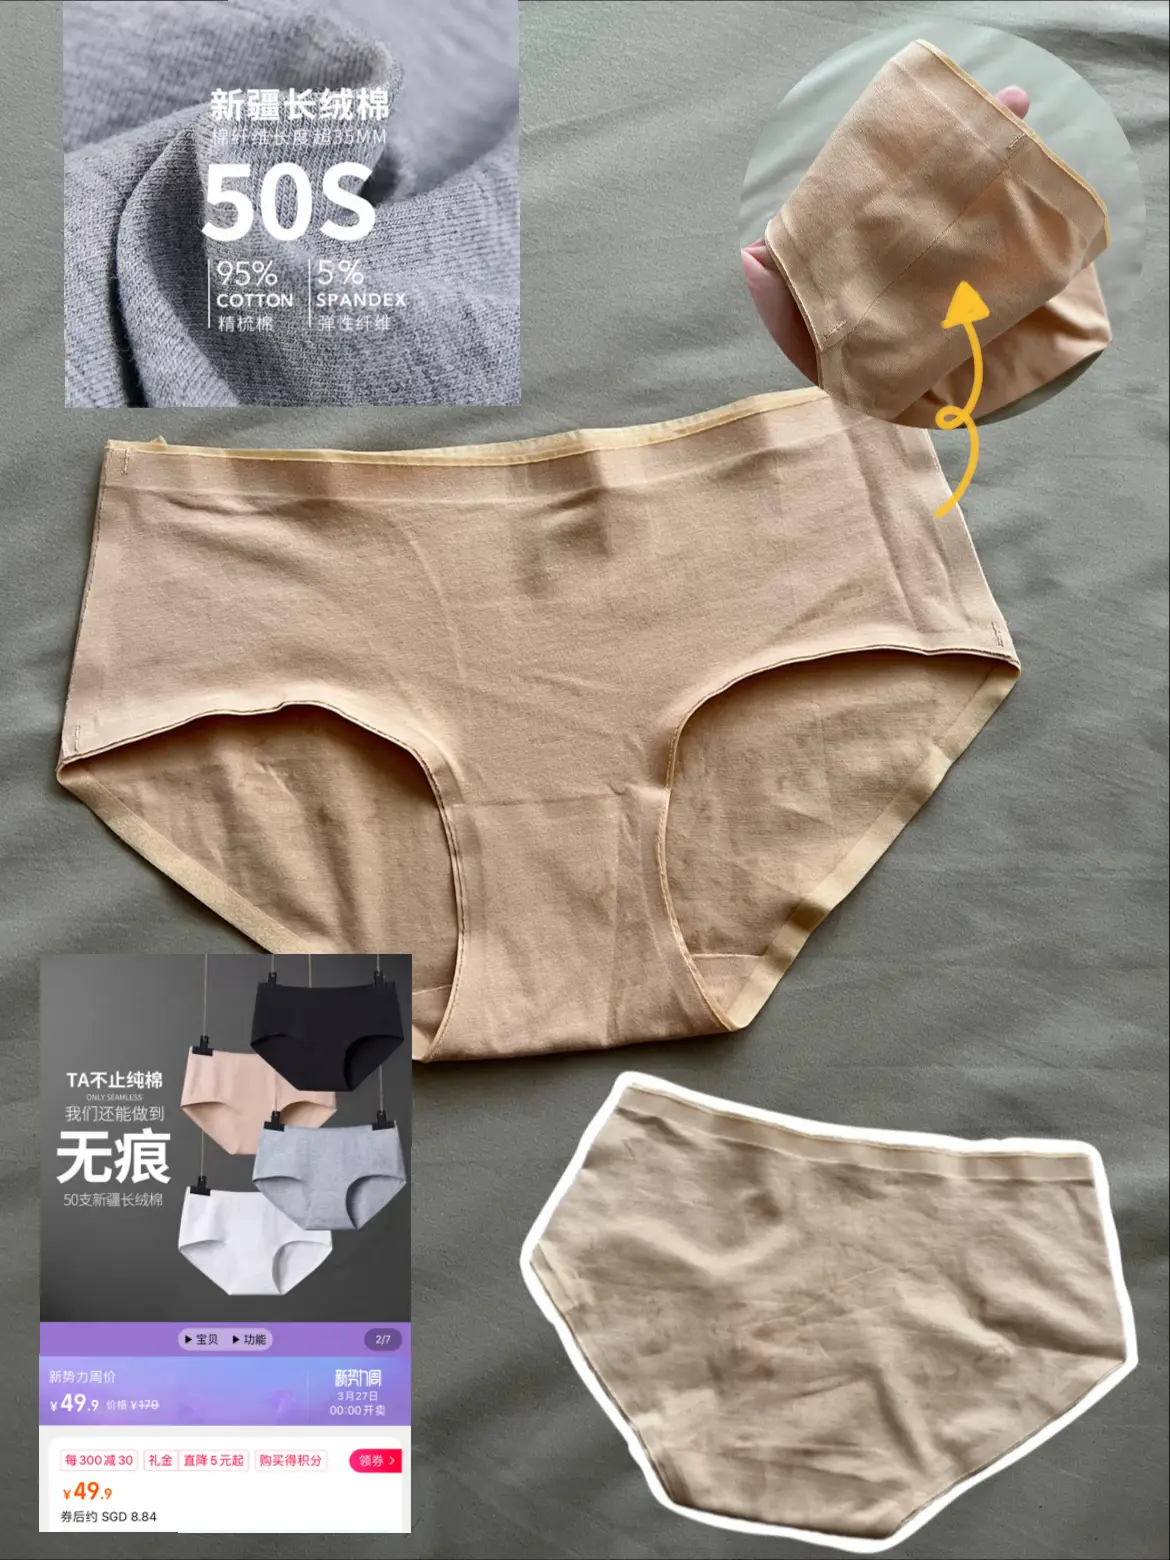 $2 High quality panties from TAOBAO!🥳, Gallery posted by Meiyu ♡